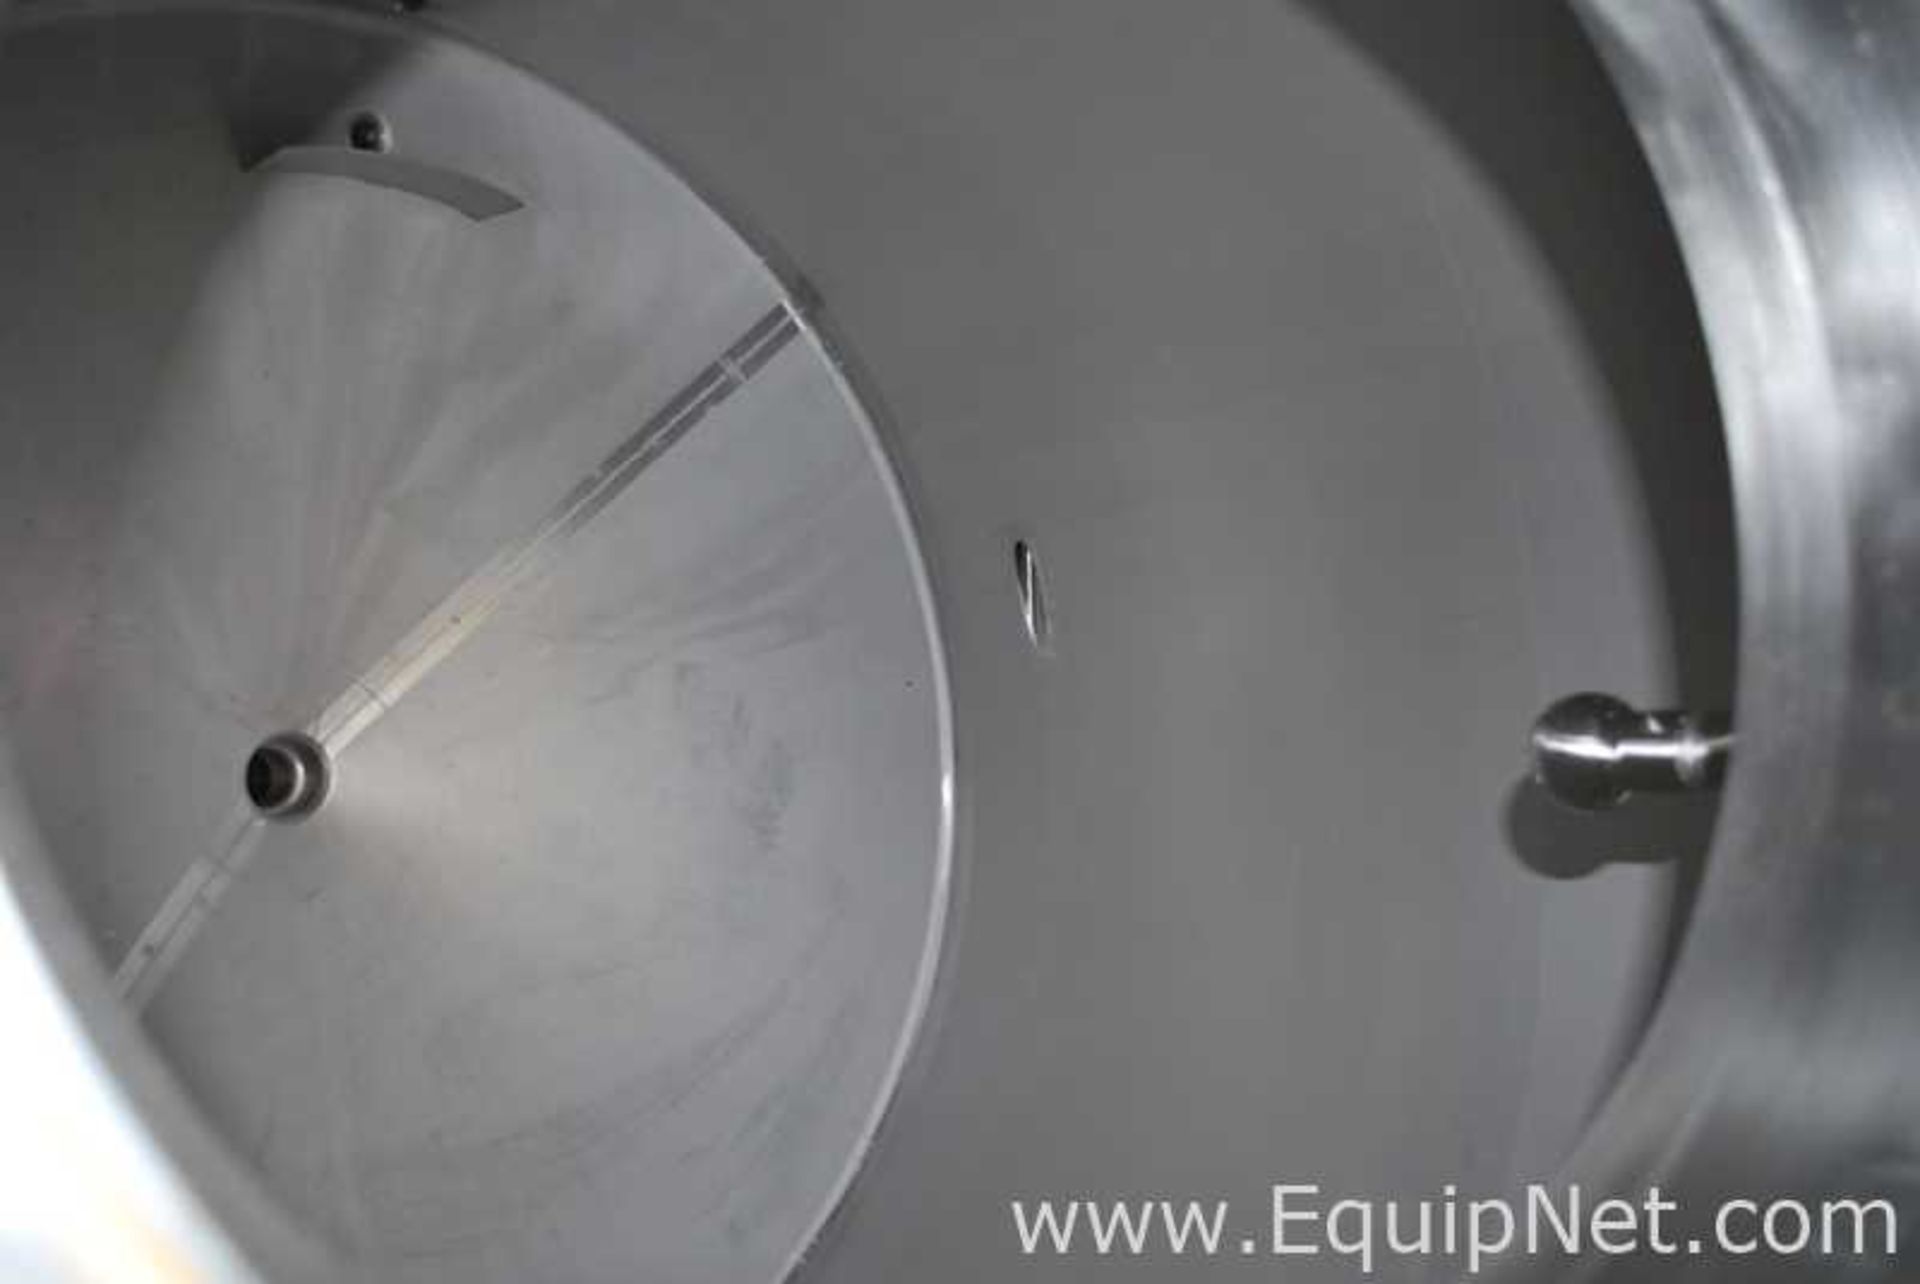 Brew House Sytem with Three- 20 BBL Vessels Mash Tun|Lauter Tun|Whirlpool-Boil Kettle - Image 6 of 10